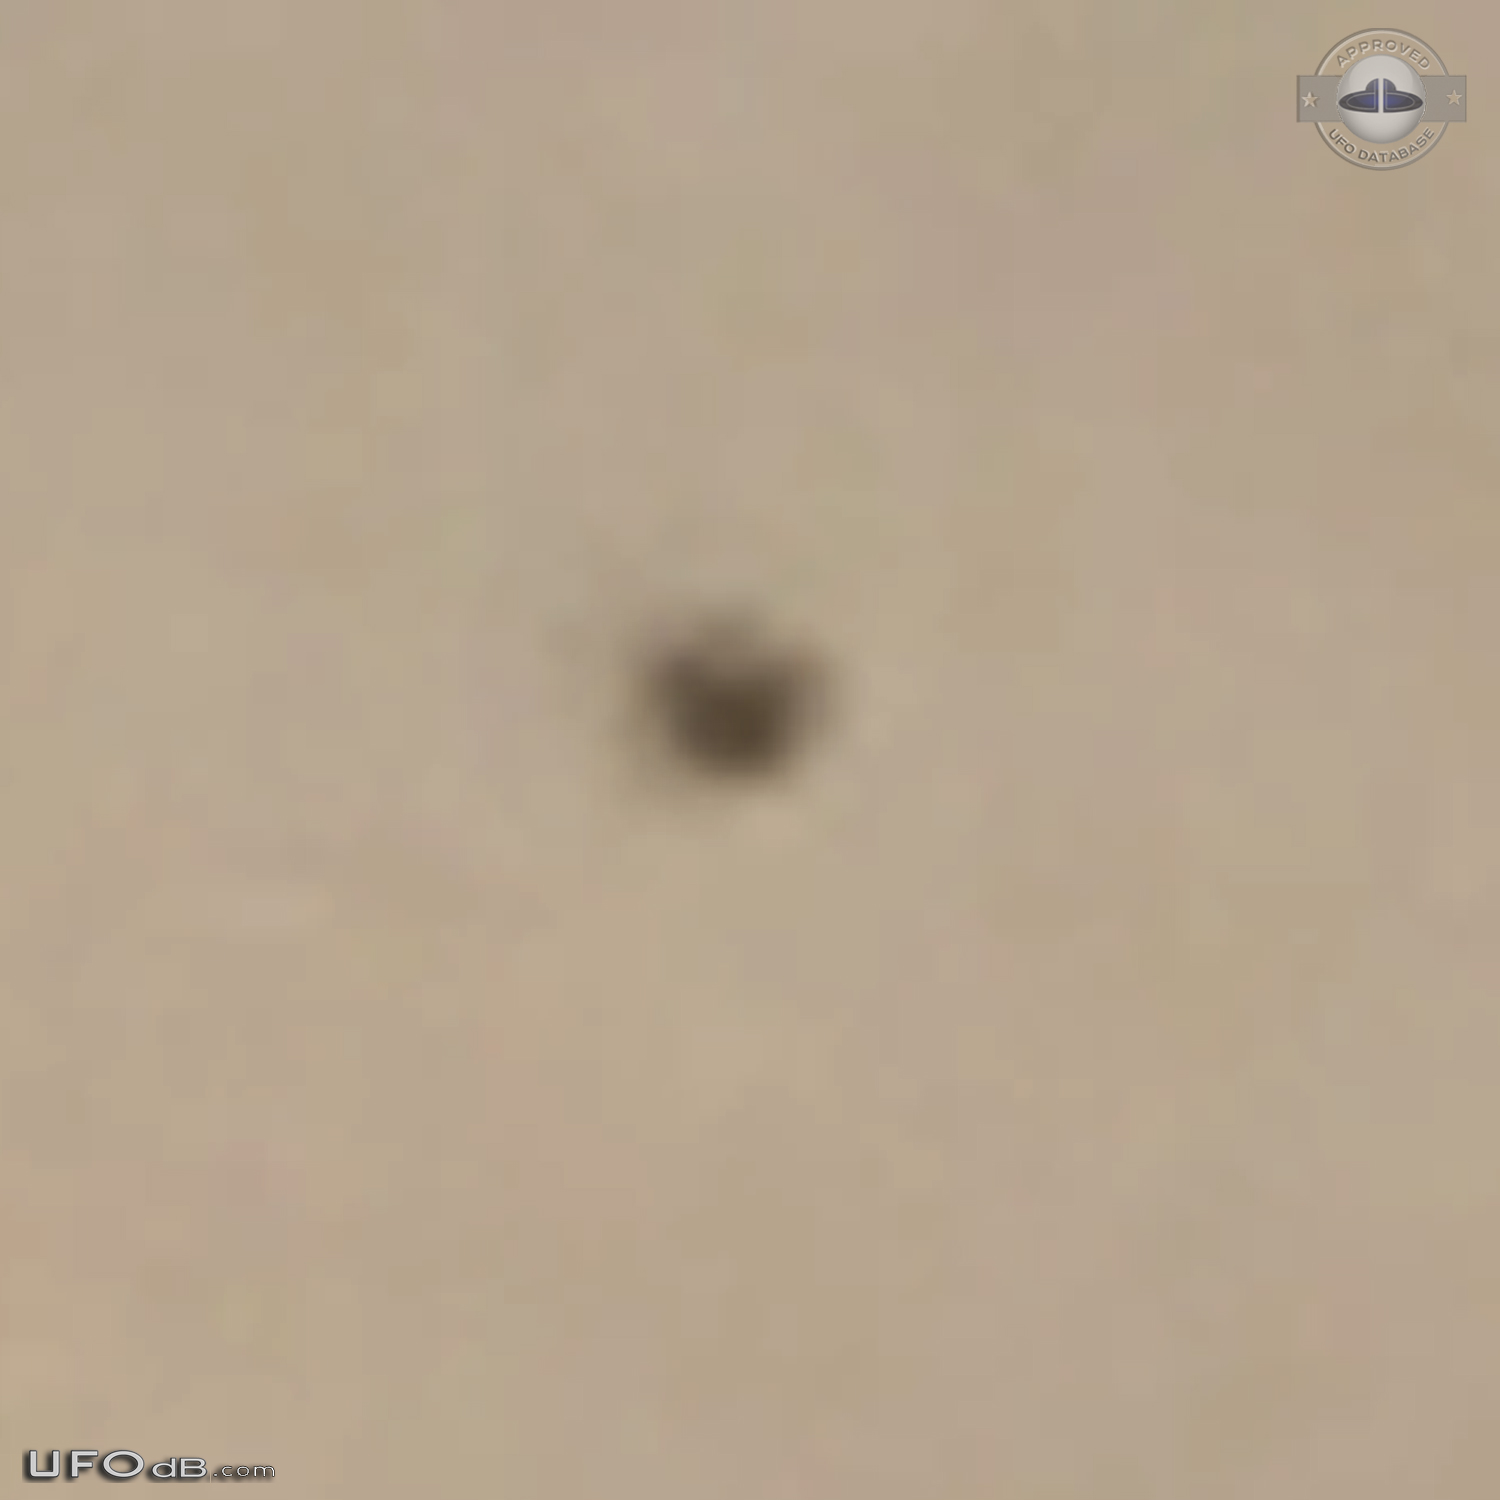 UFO on the 2nd of 3 consecutive photos - Edmonton Alberta Canada 2015 UFO Picture #717-5